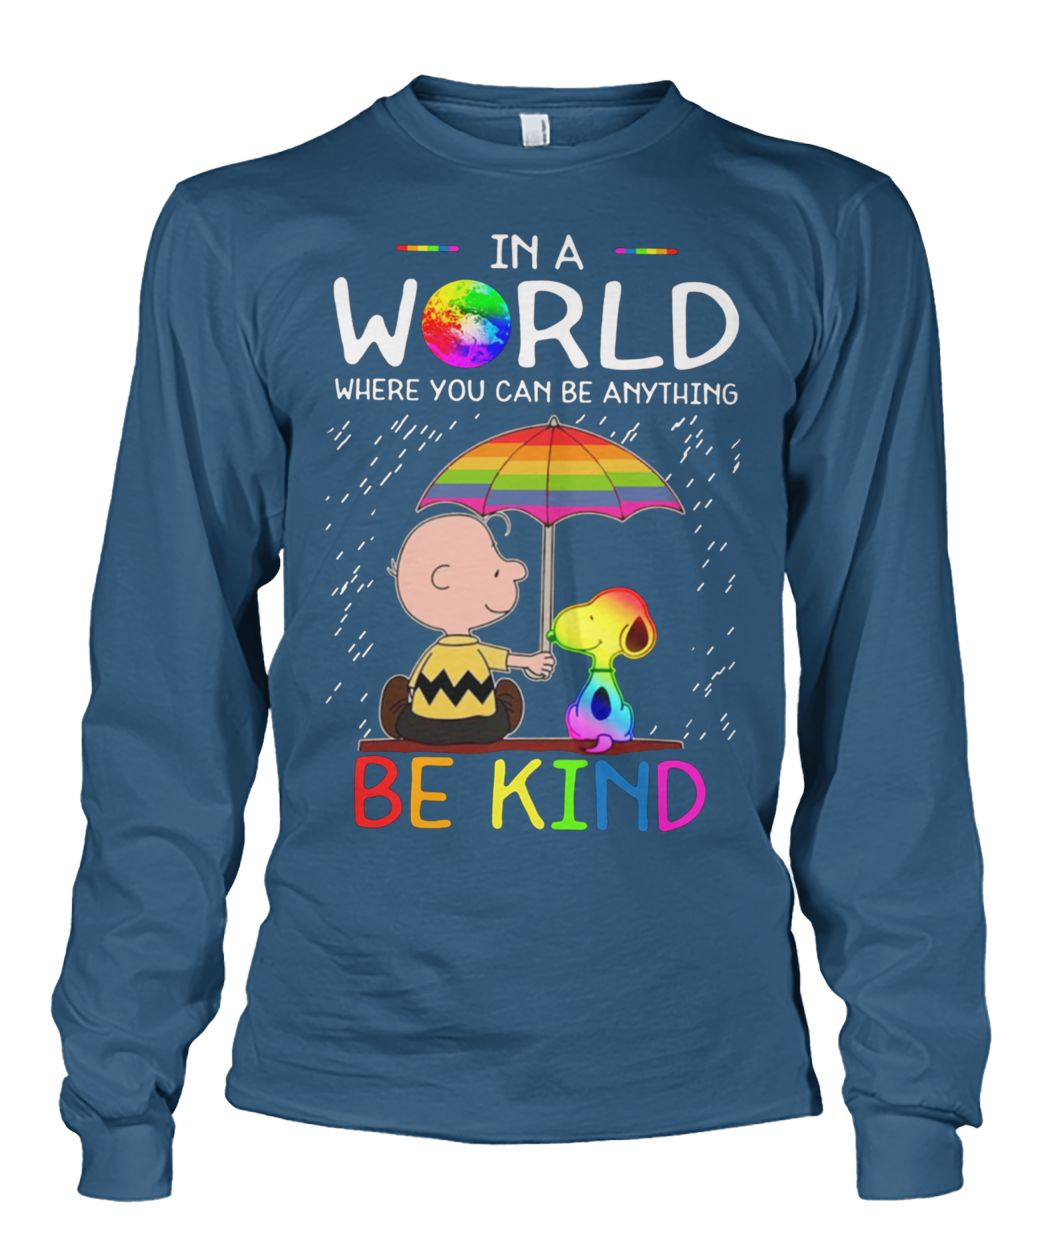 Charlie brown snoopy in a world where you can be anything be kind lgbt unisex long sleeve